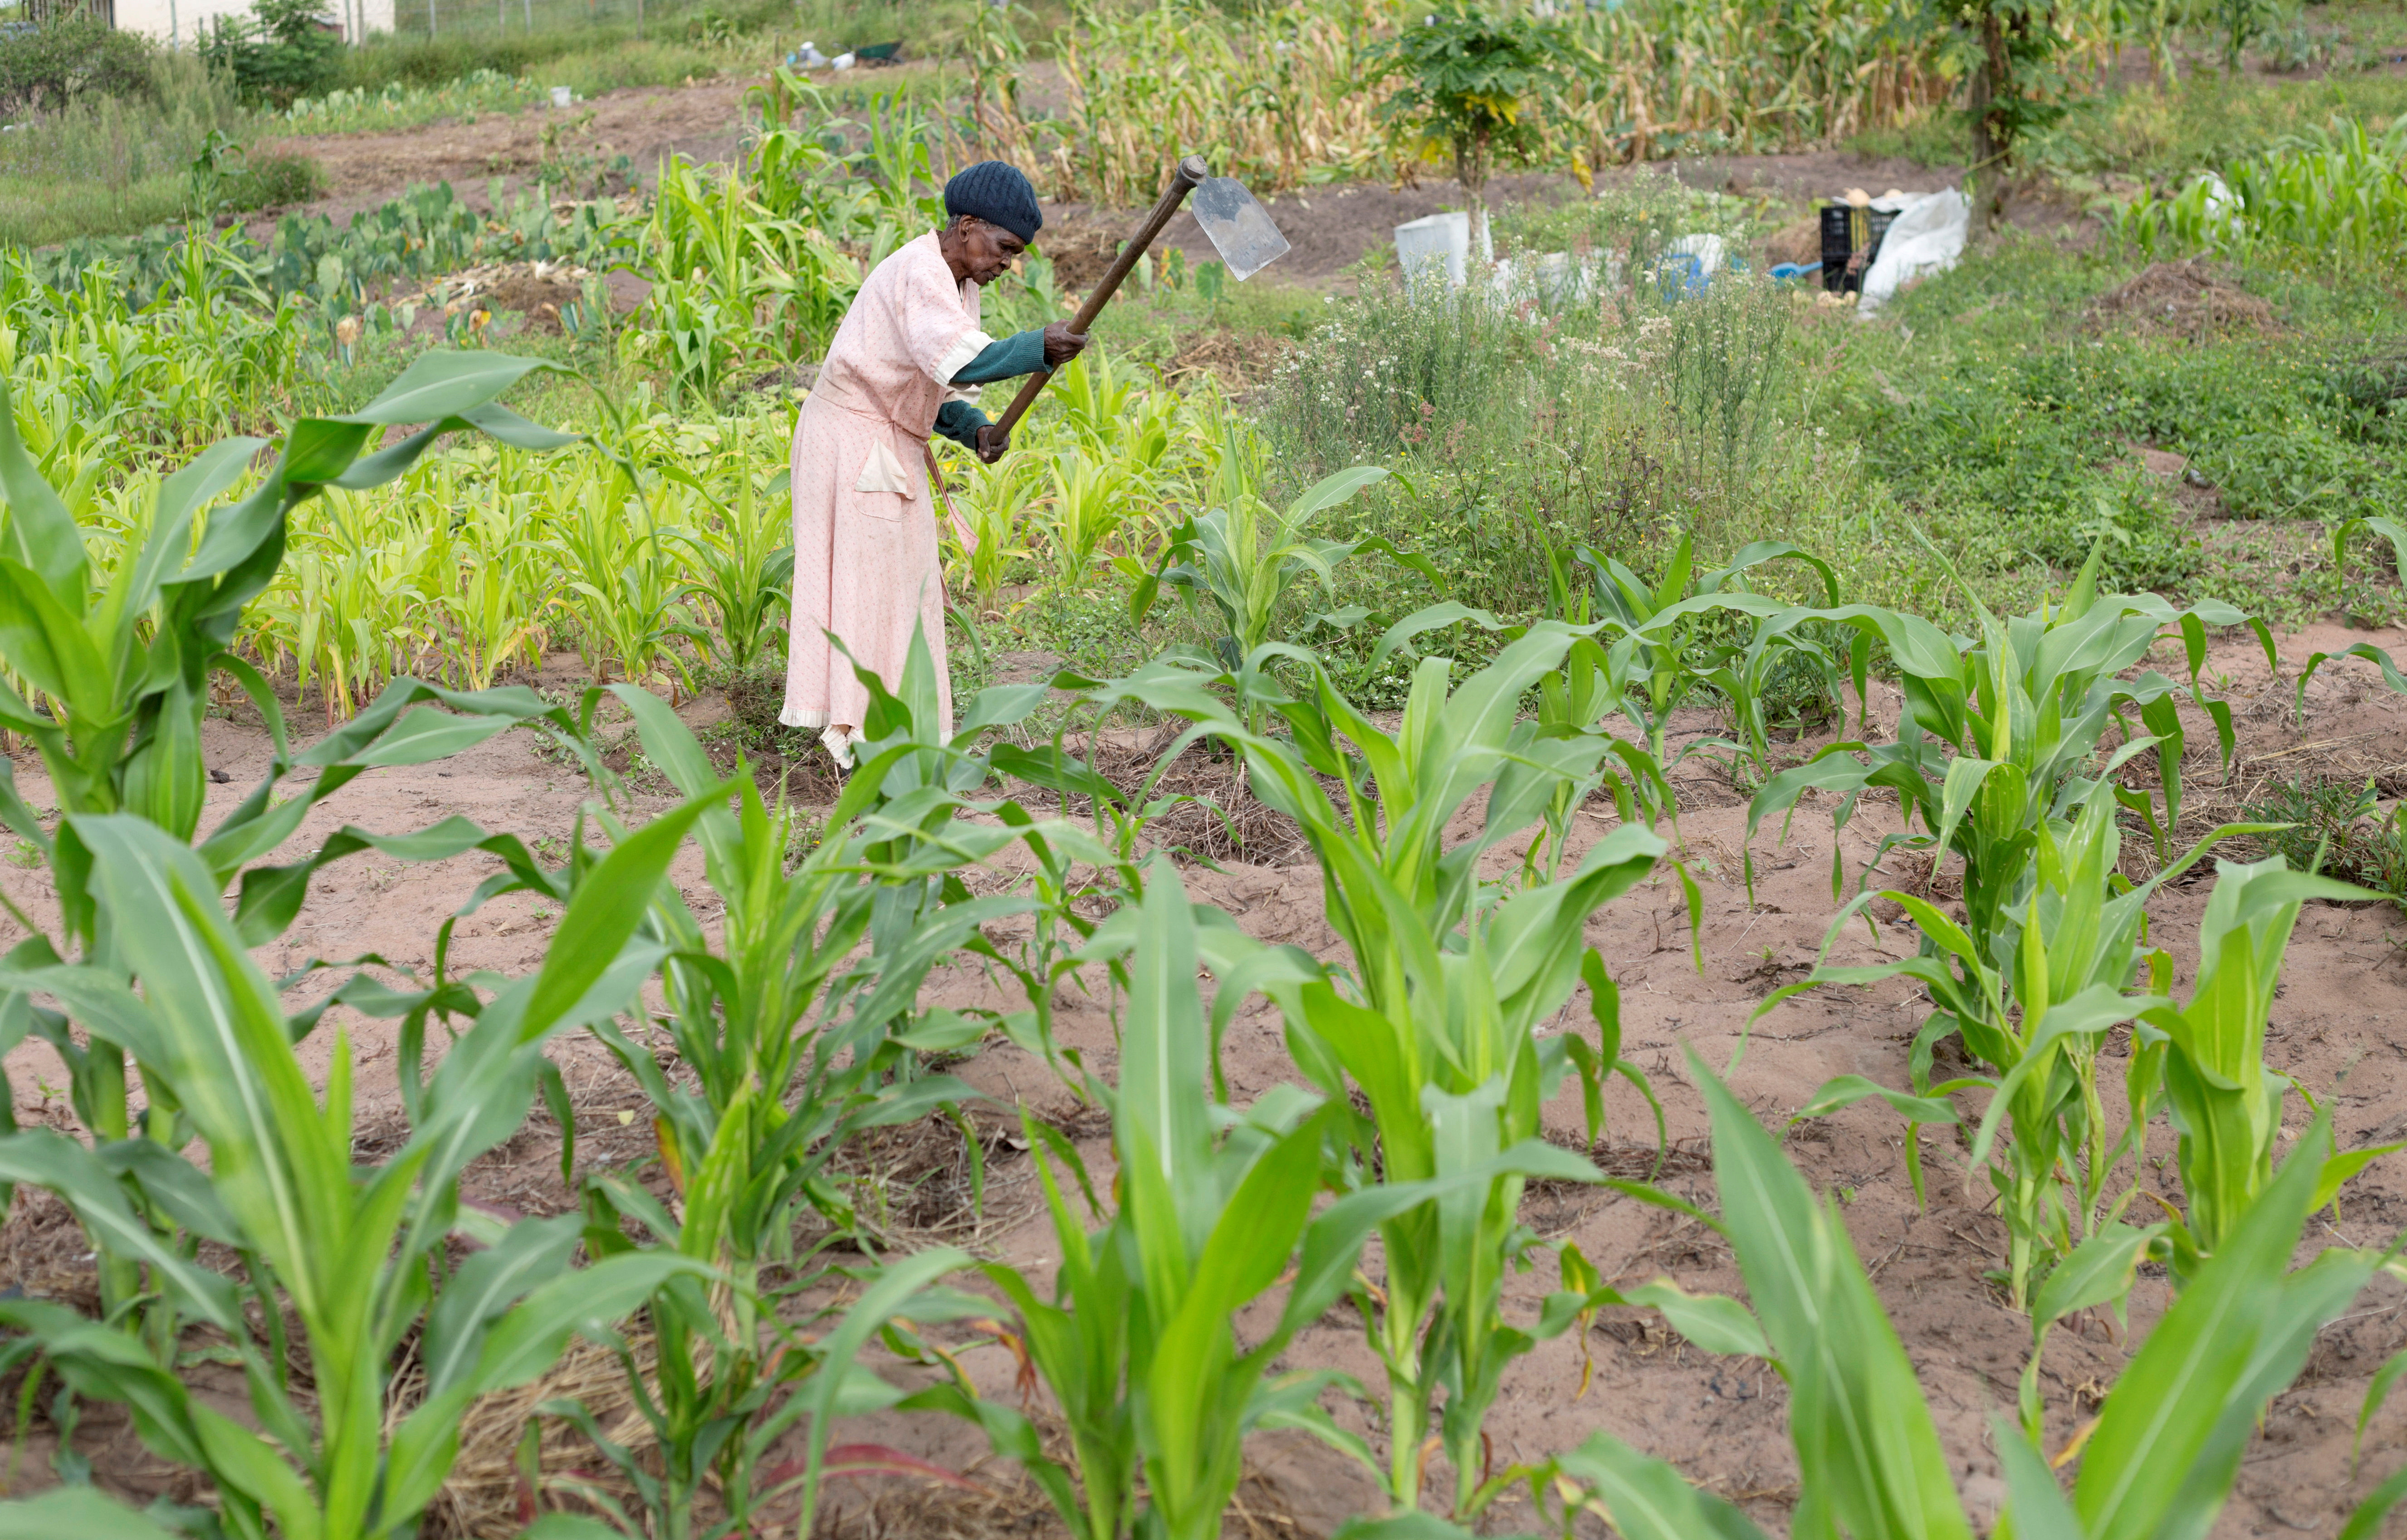 A woman works in a communal vegetable garden in KwaNdengezi